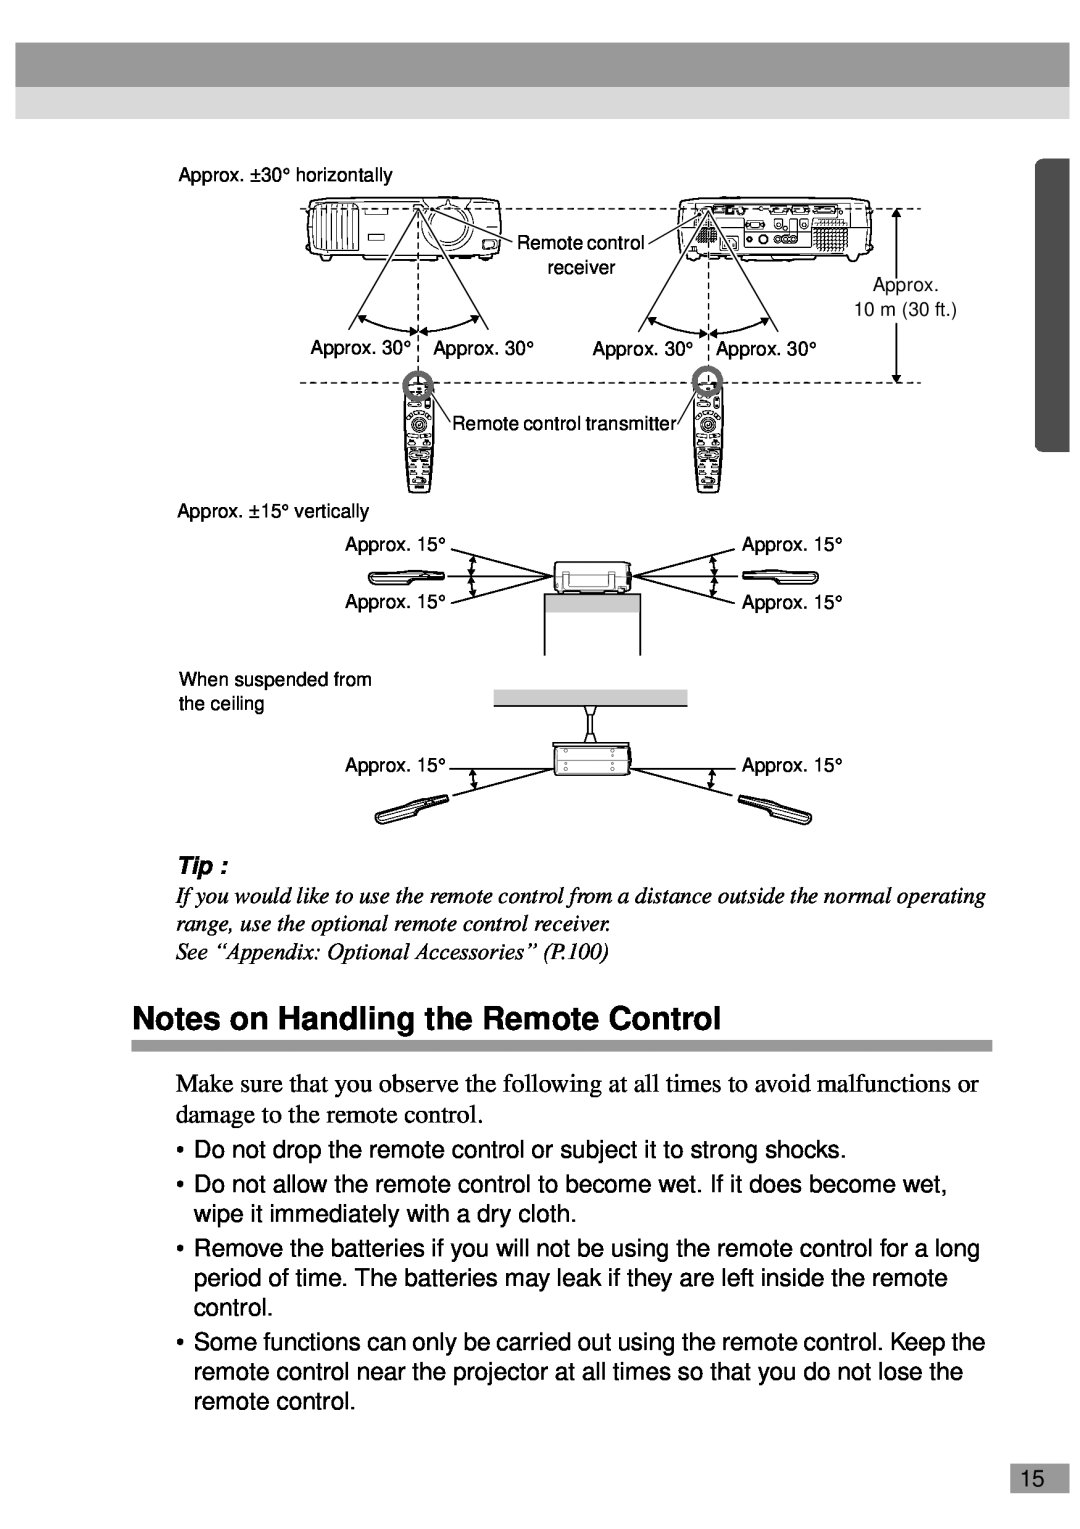 Epson EMP-820, ELP-811, ELP-600, ELP-800UG, ELP-820, ELP-810UG, EMP-810UG, EMP-811 manual Notes on Handling the Remote Control 